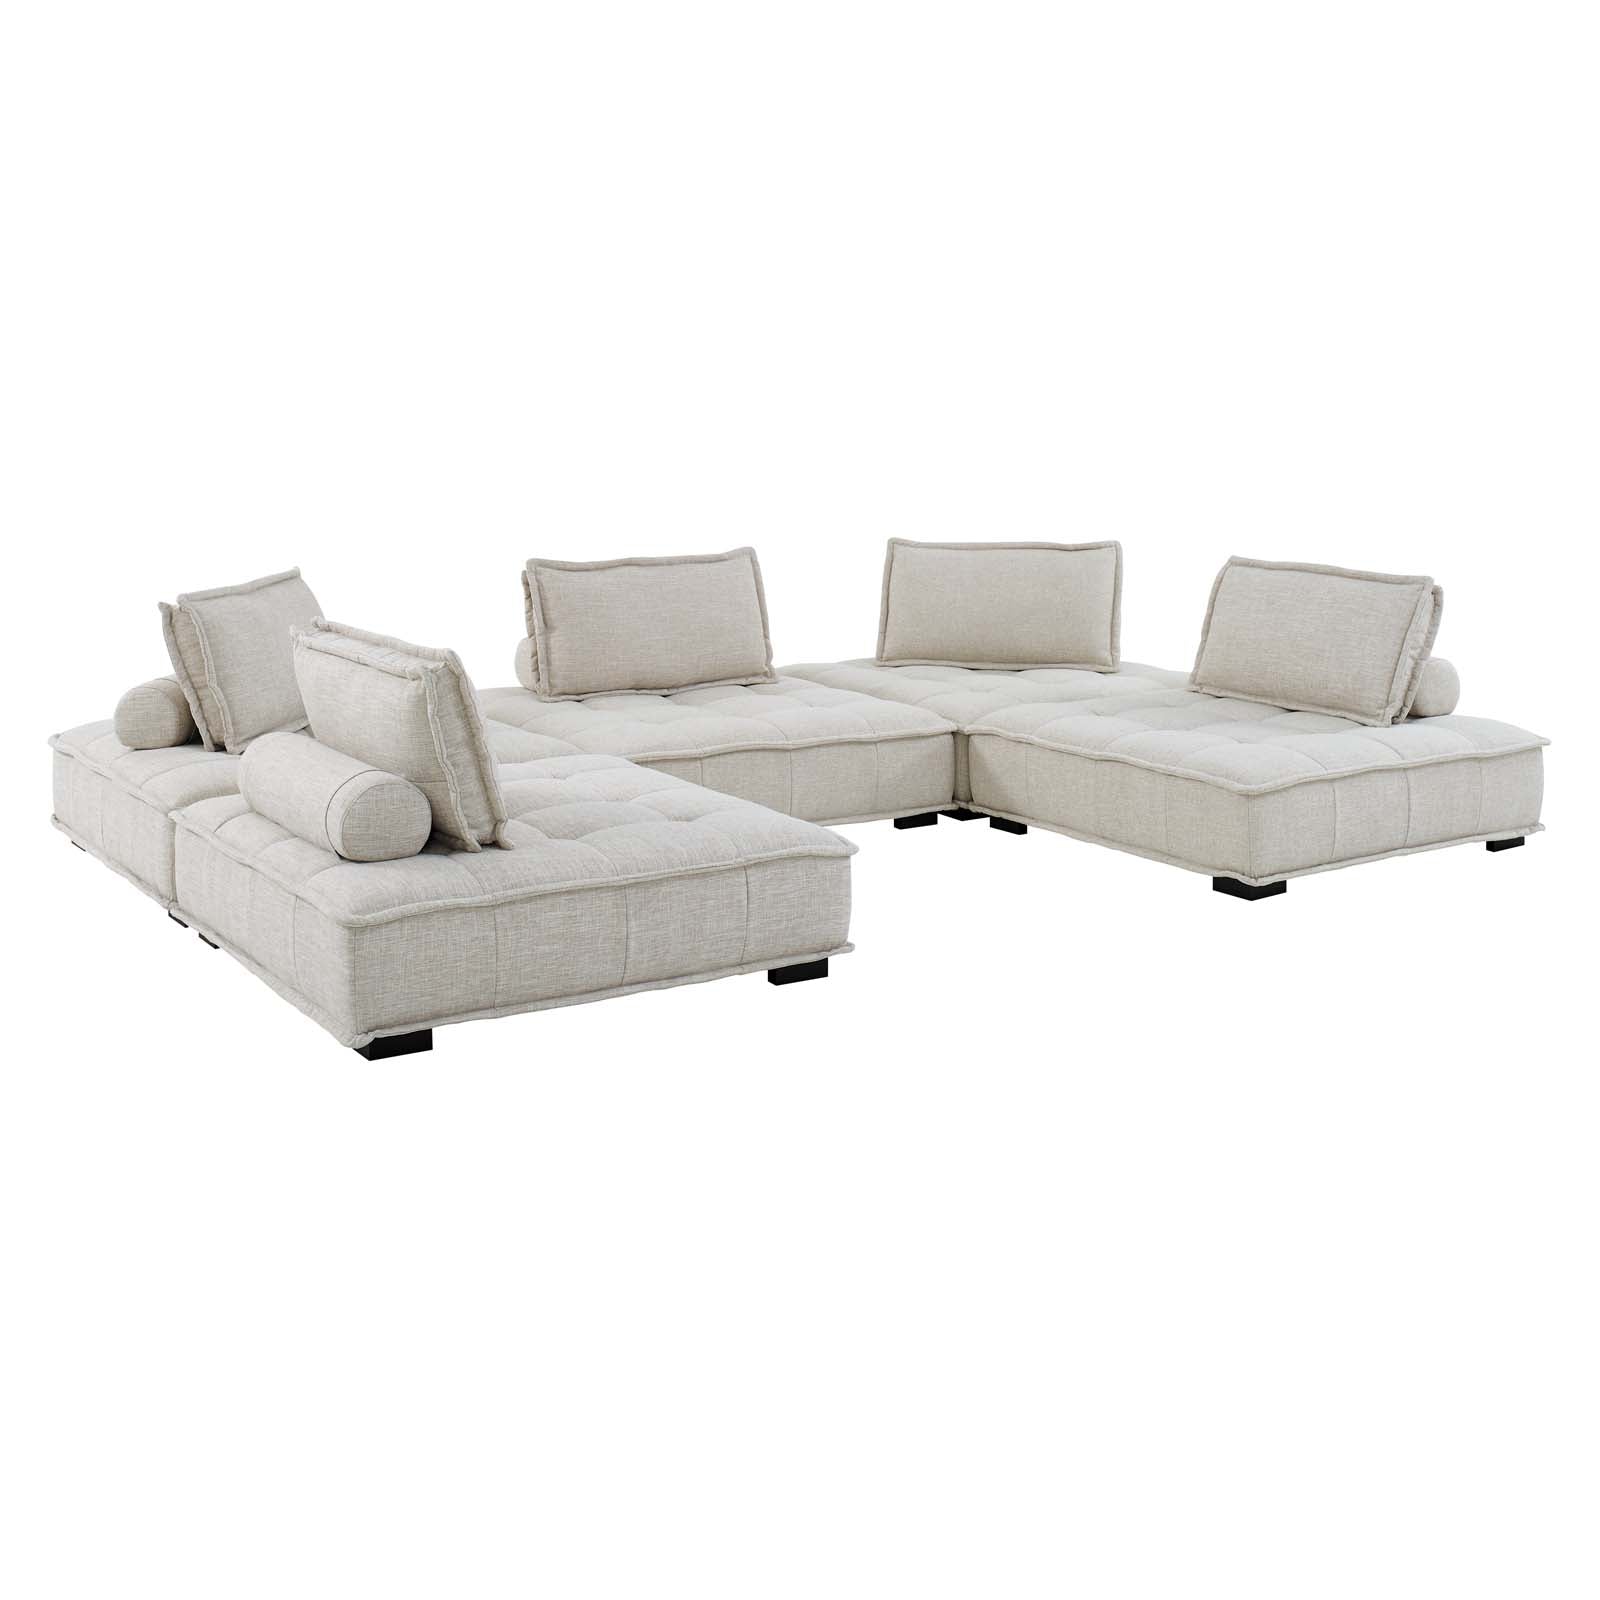 Modway Sectional Sofas - Saunter-Tufted-Fabric-Fabric-5-Piece-Sectional-Sofa-Beige